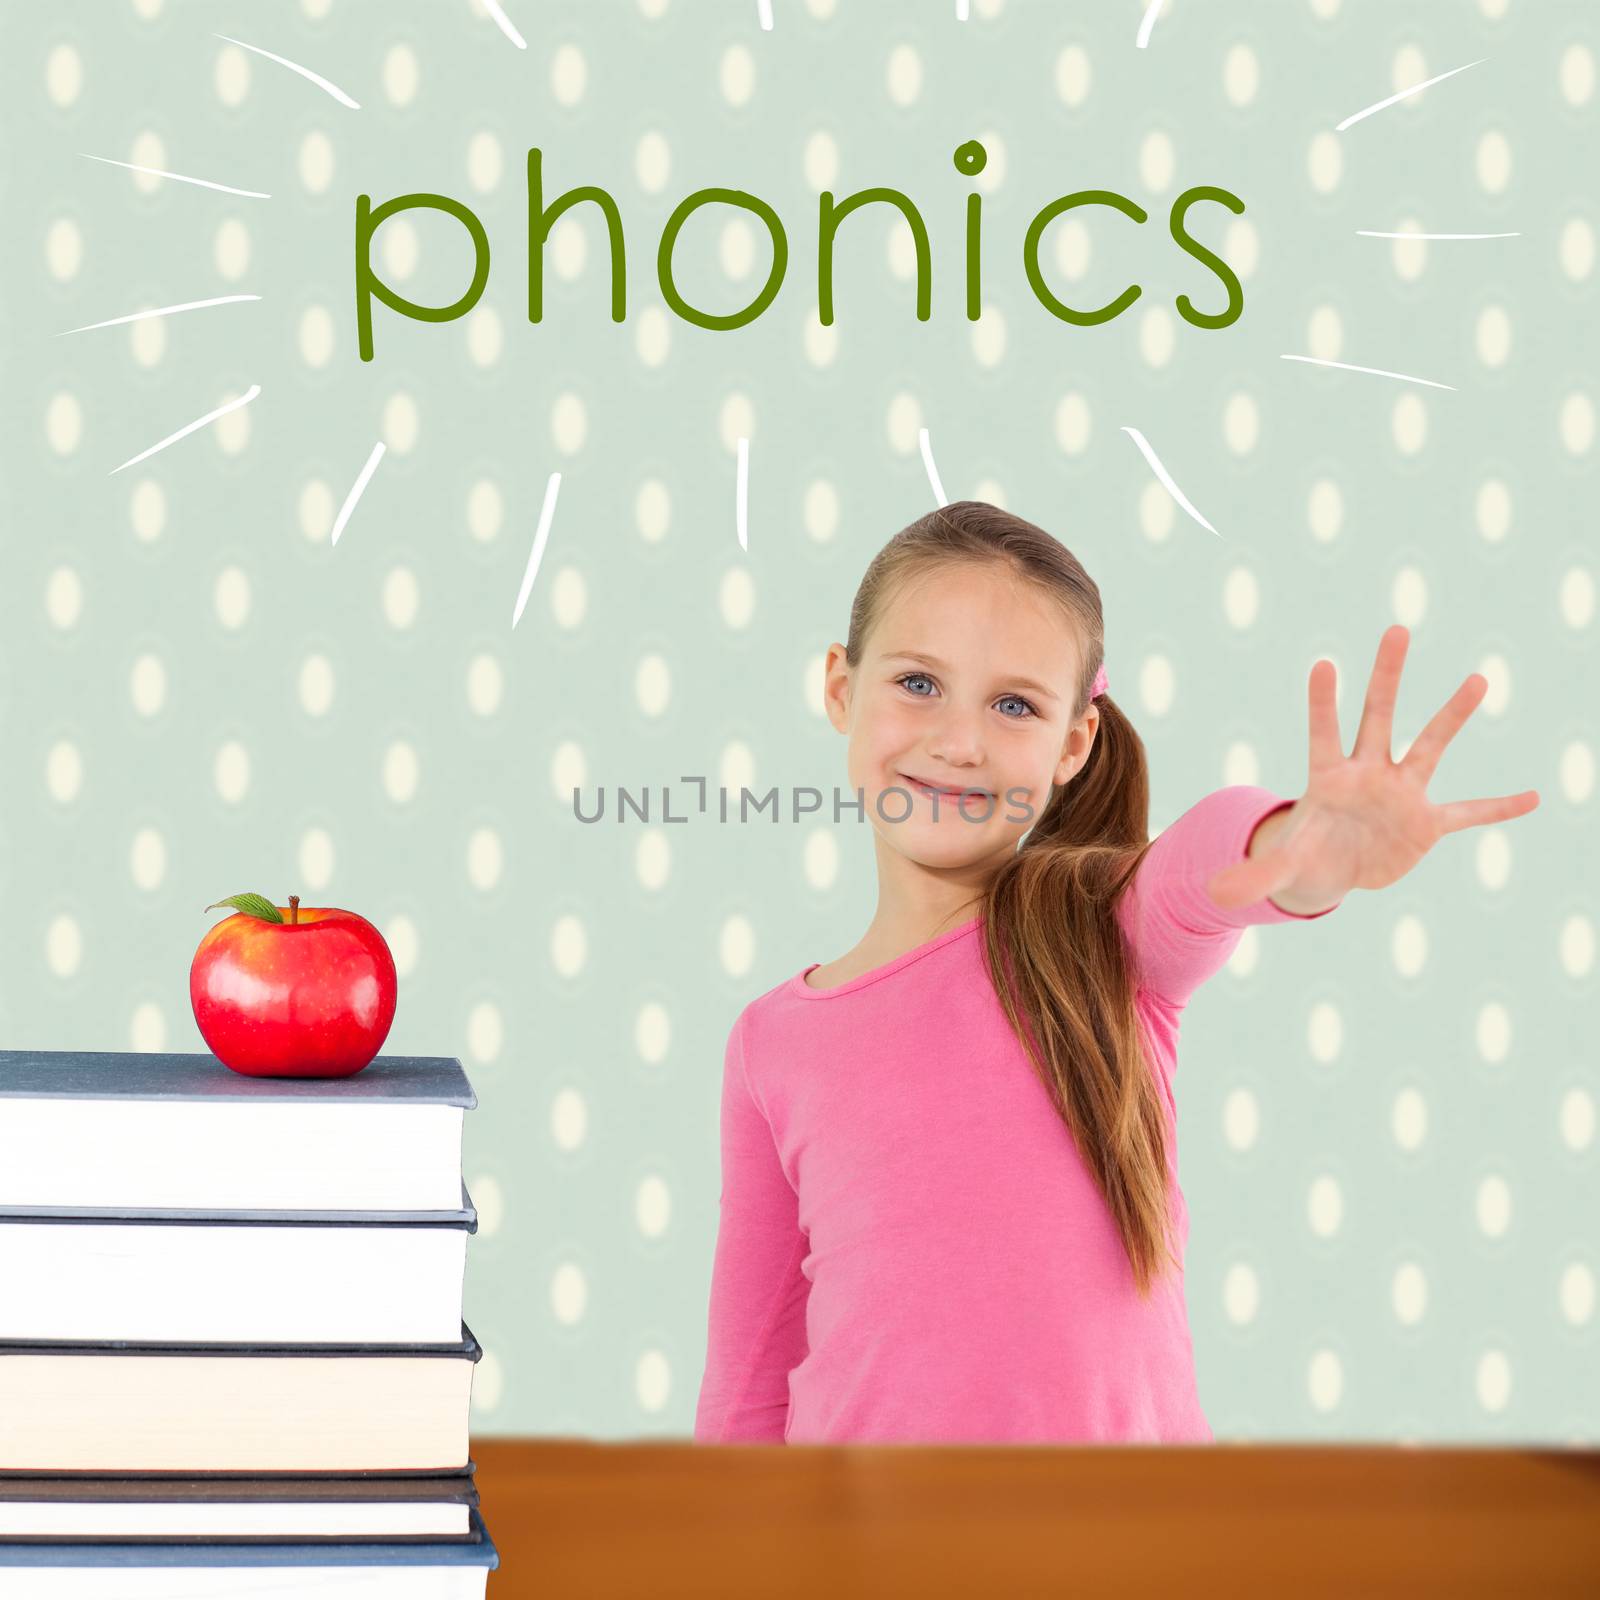 The word phonics and cute girl with hand out against red apple on pile of books